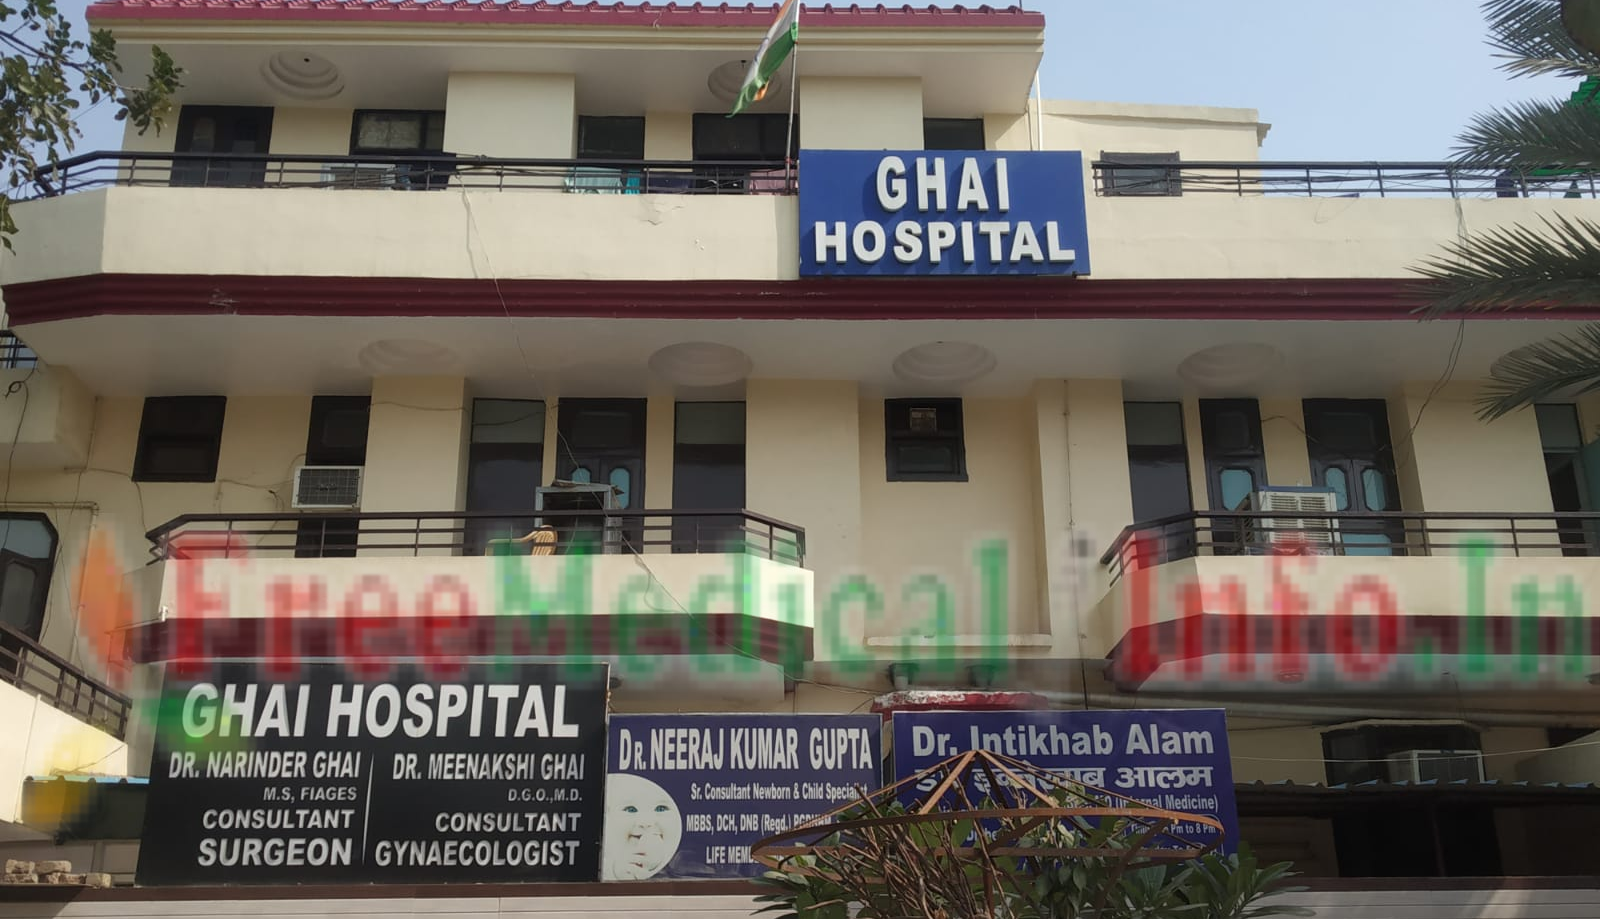 Ghai Hospital - Best Allergies, General Medicine, General Physician, General Surgery, Gynaecology in Faridabad